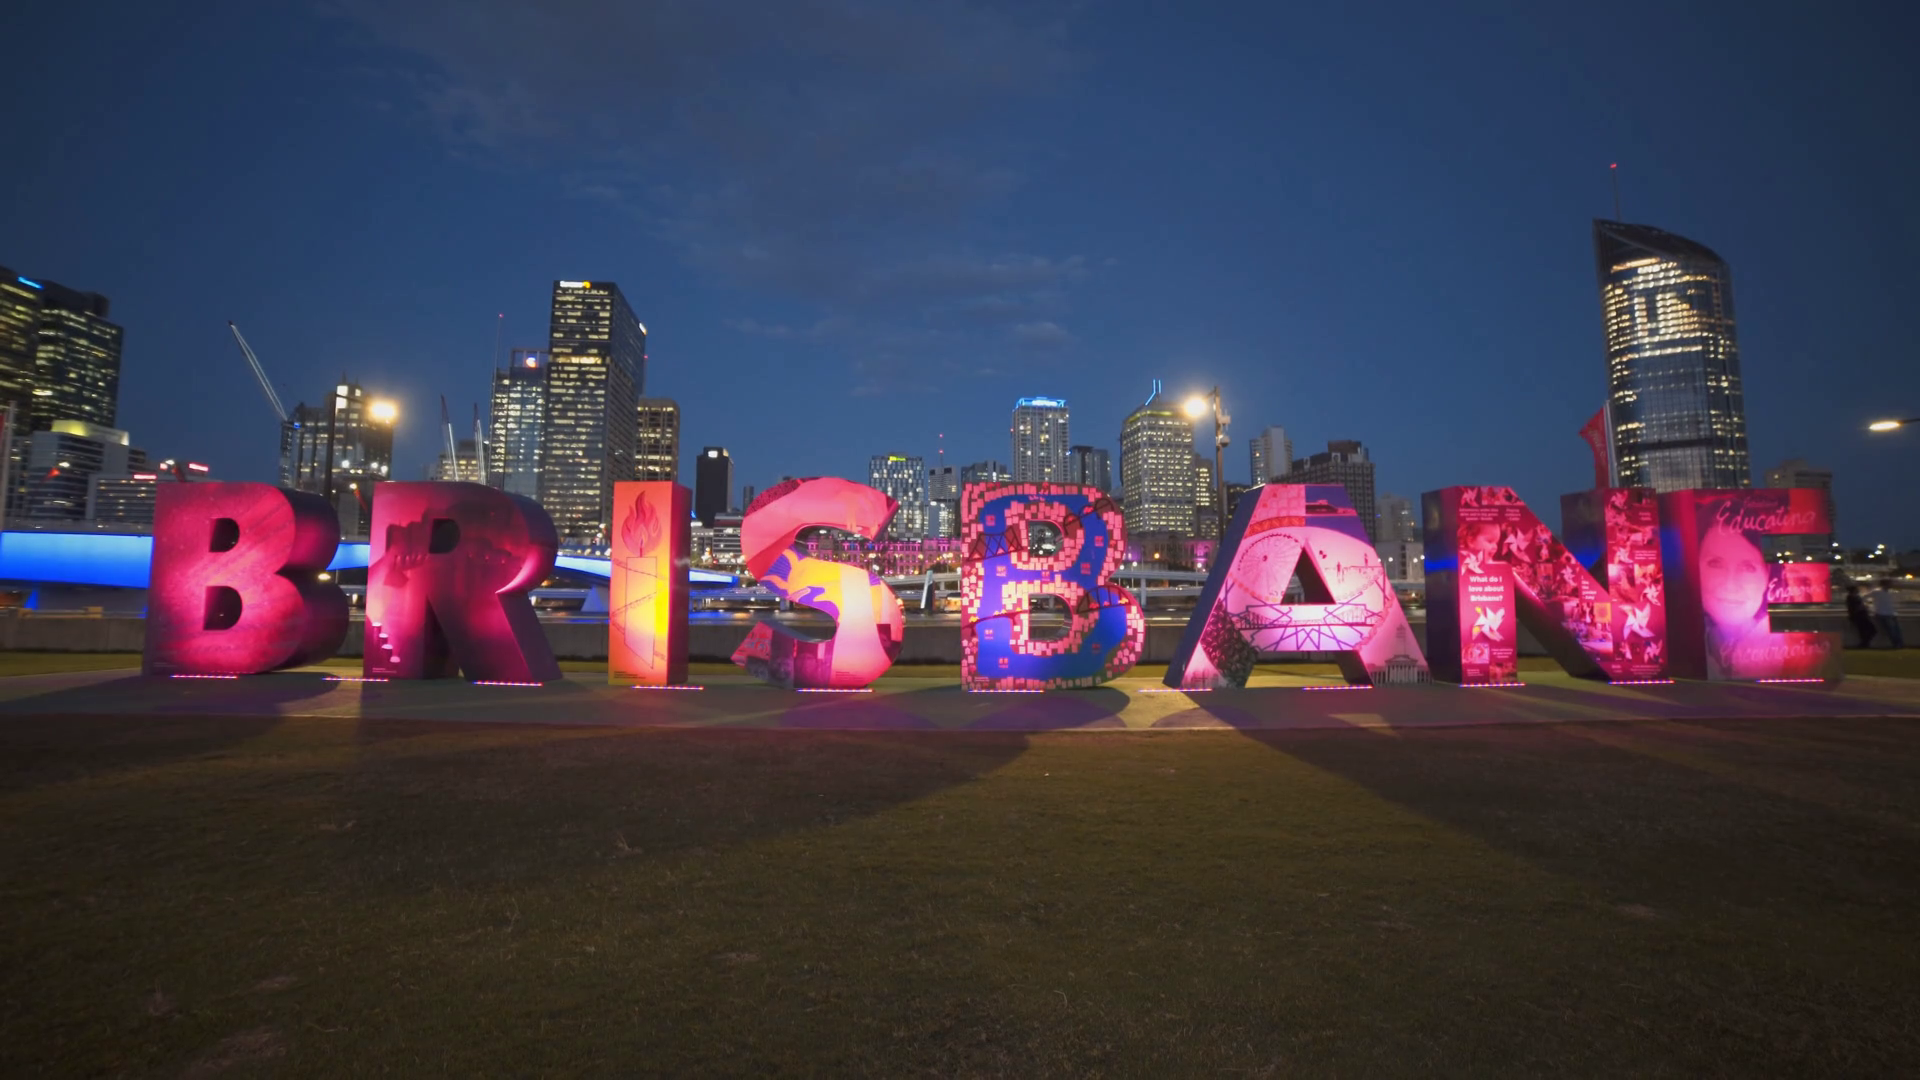 videoblocks-night-view-of-the-g20-brisbane-letters-illuminated-in-red-at-south-bank-in-queensland-australia_b9cdxqhtx_thumbnail-full01.png